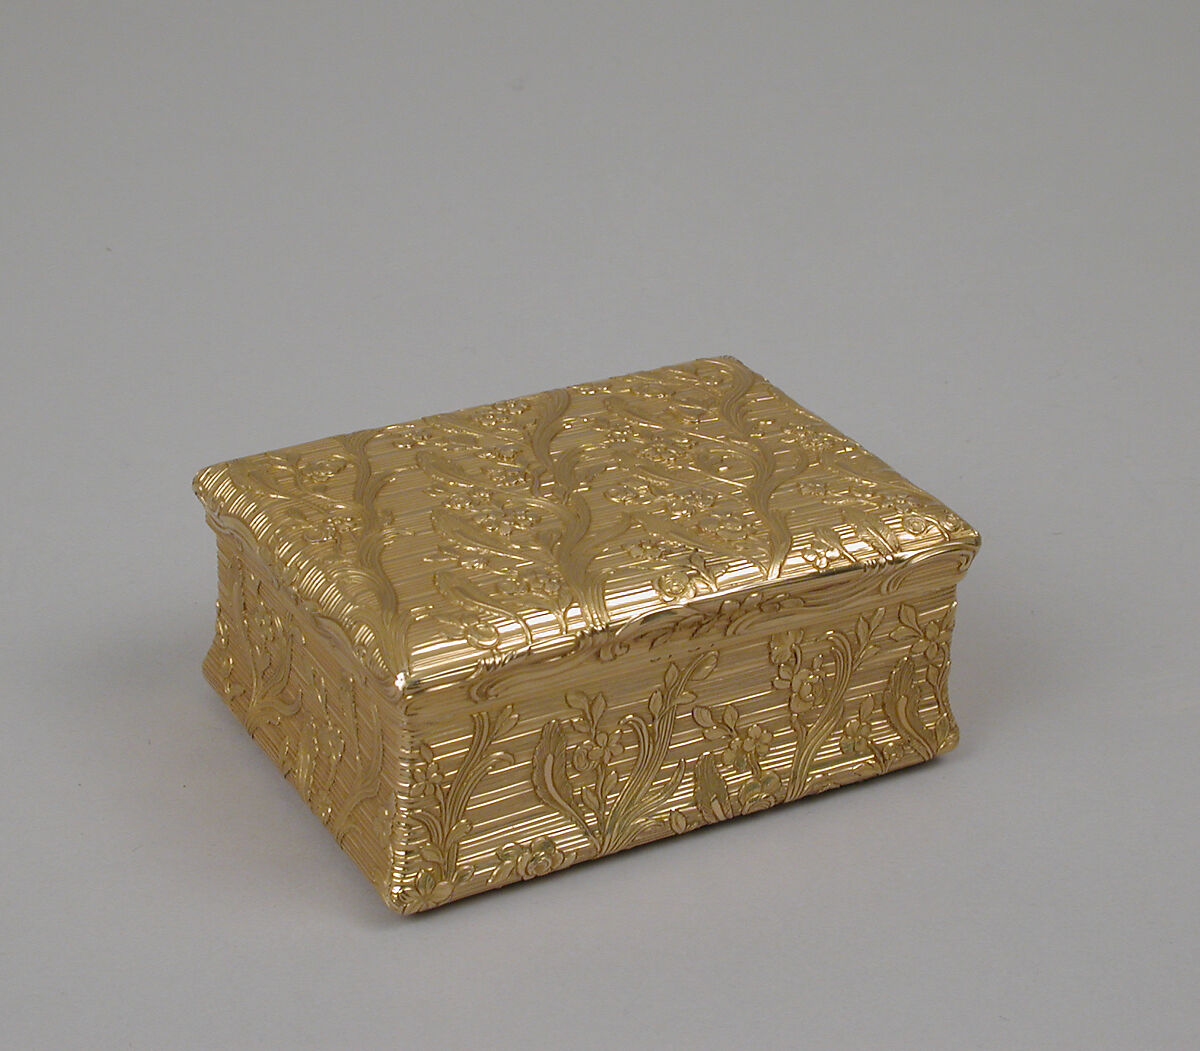 Snuffbox, Probably by Thomas-Louis Lévesque (master 1720, retired 1748/9), Gold, French, Paris 